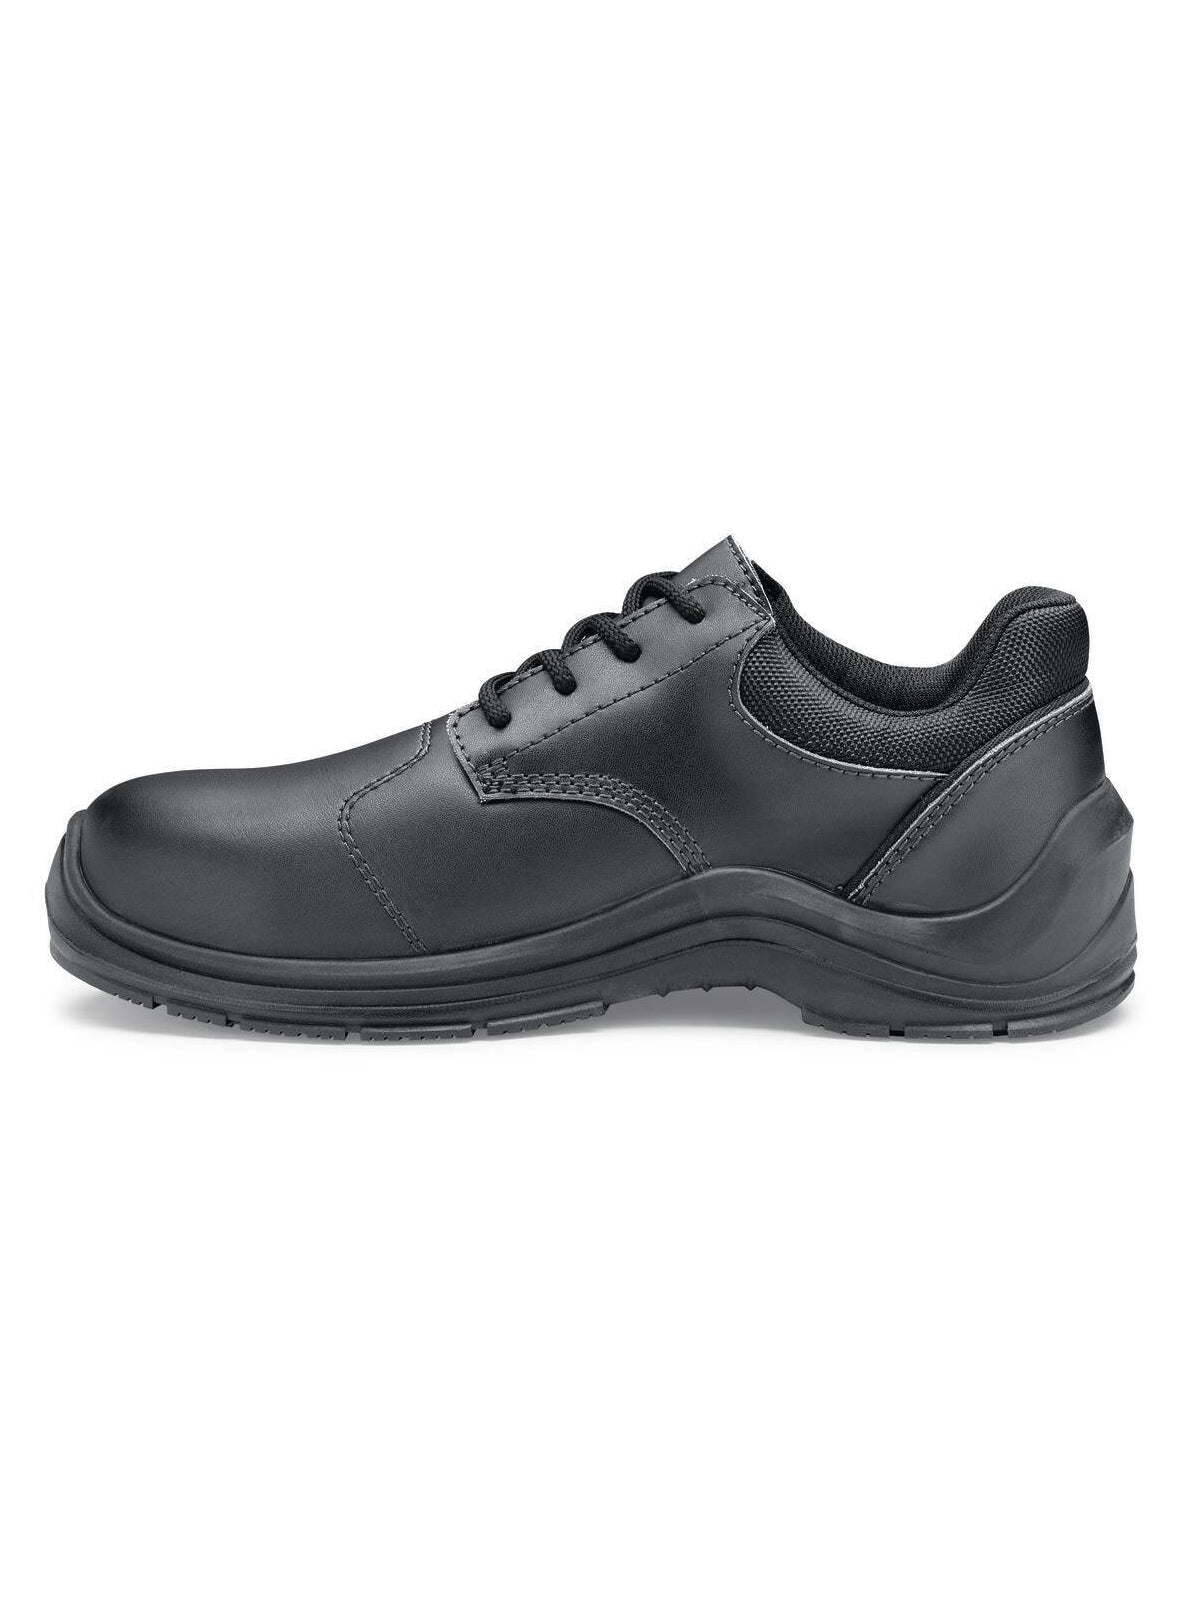 Unisex Safety Shoe Roma81 (S3) by  Safety Jogger.